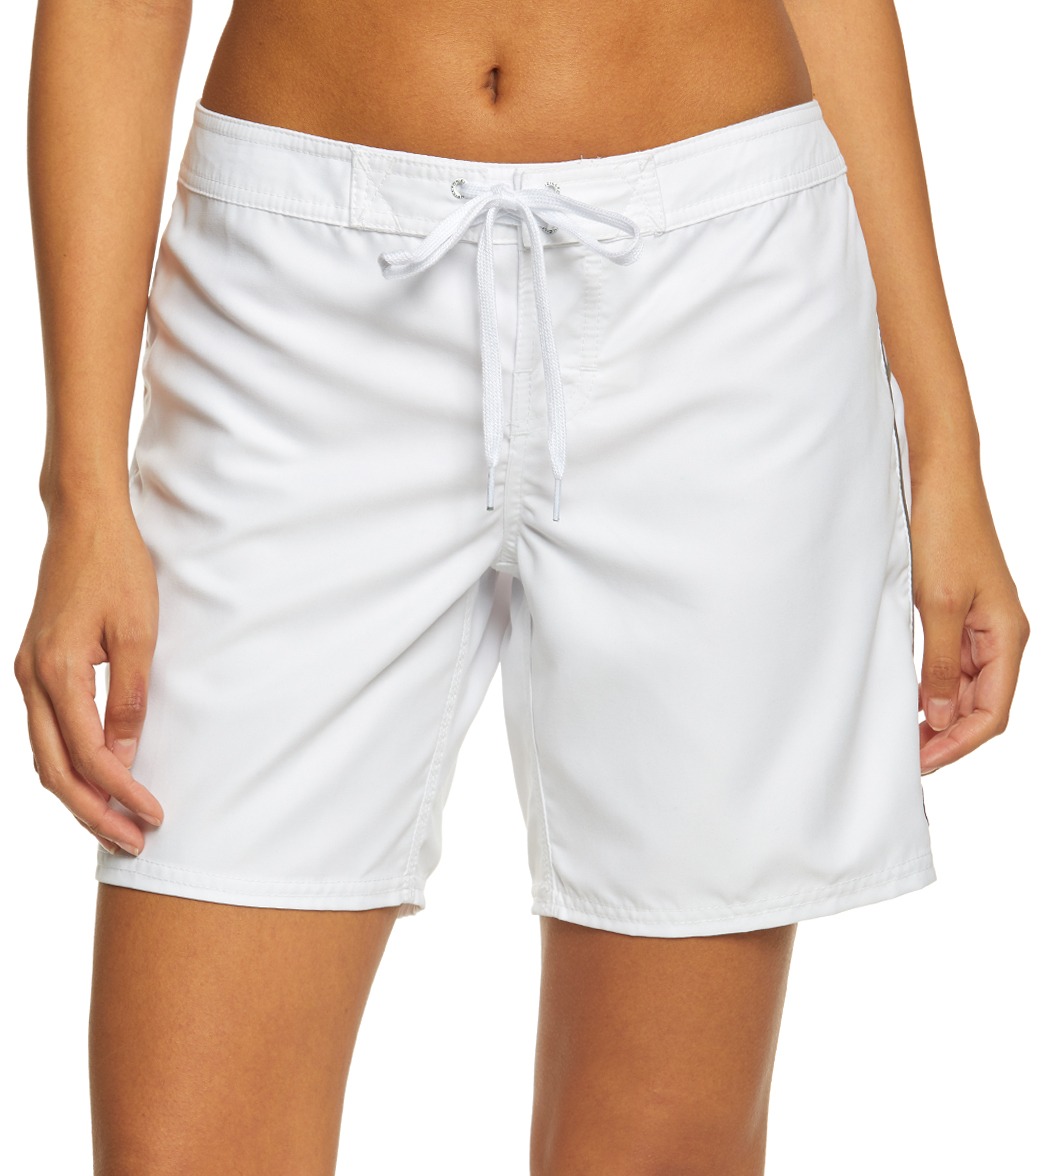 O'neill Salt Water 7 Boardshorts - White 0 Polyester - Swimoutlet.com